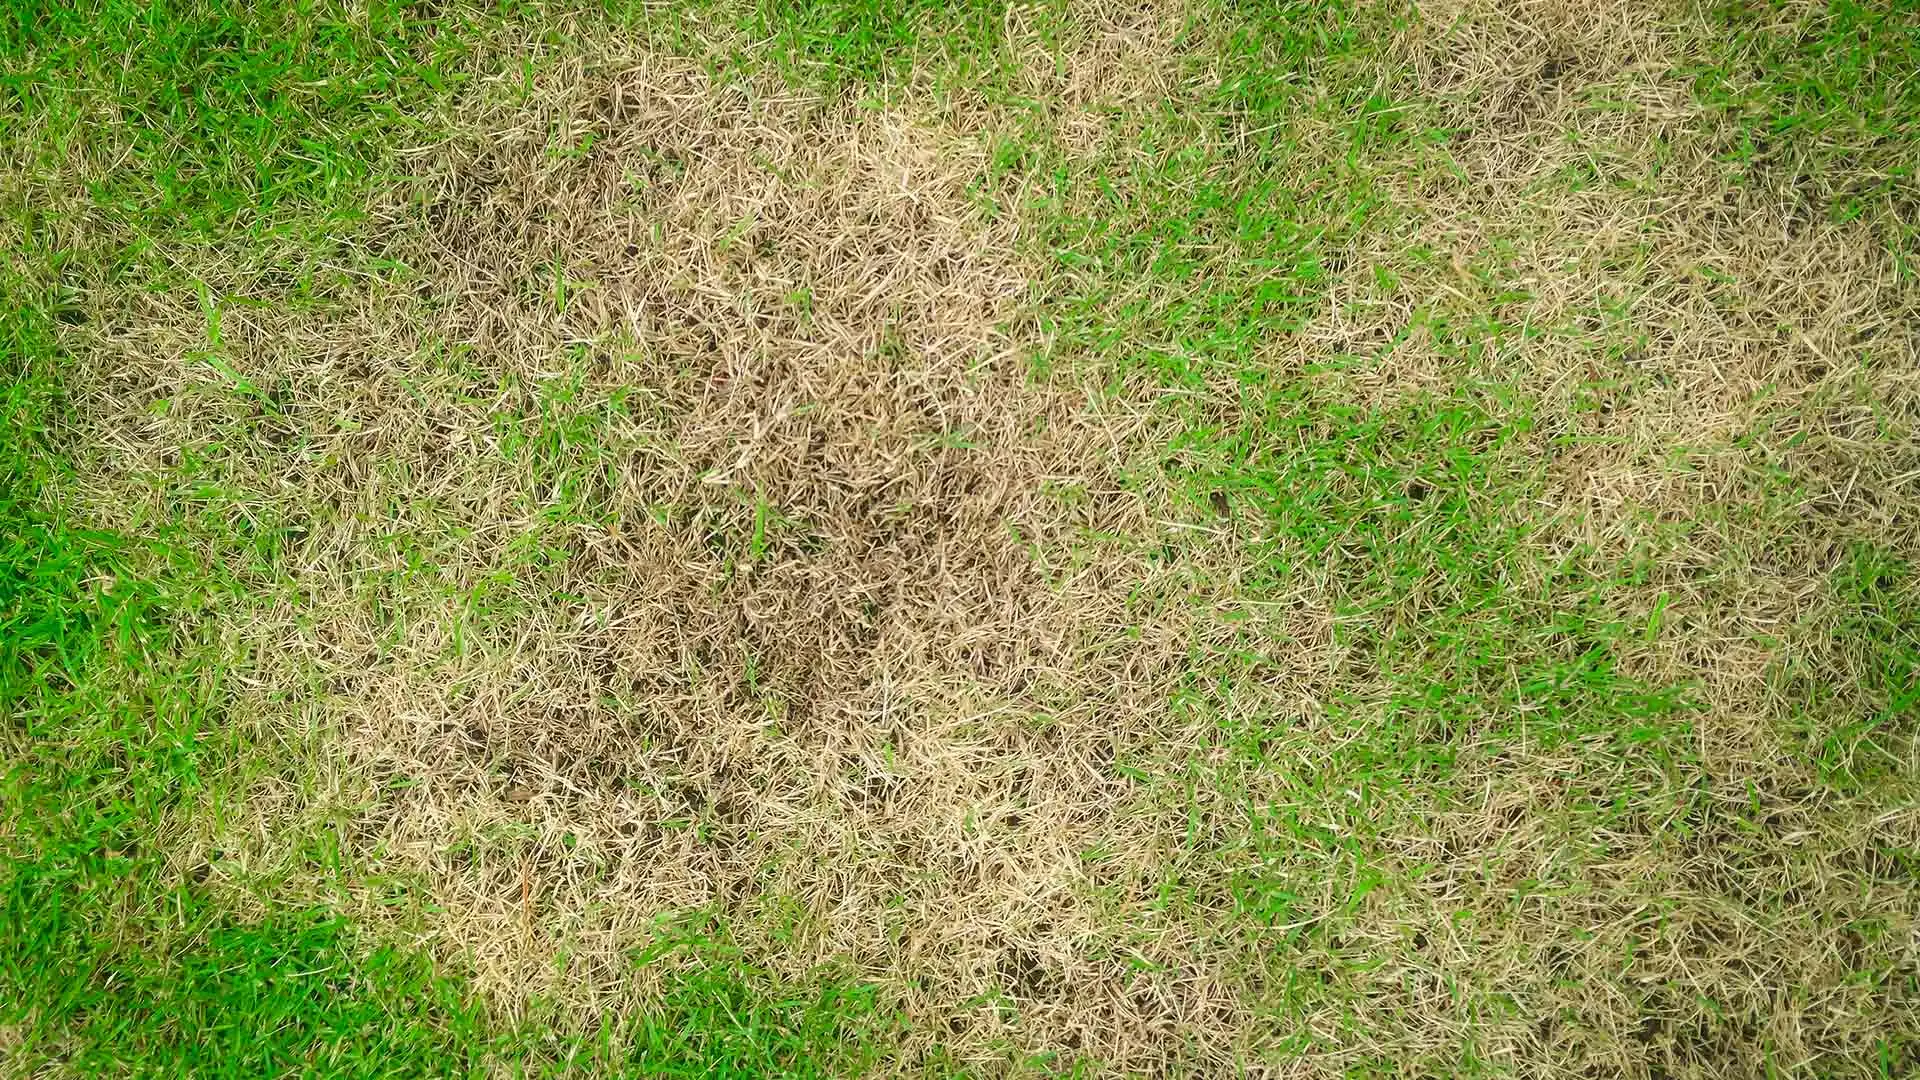 Brown Patch Lawn Disease 101 - Everything You Need to Know